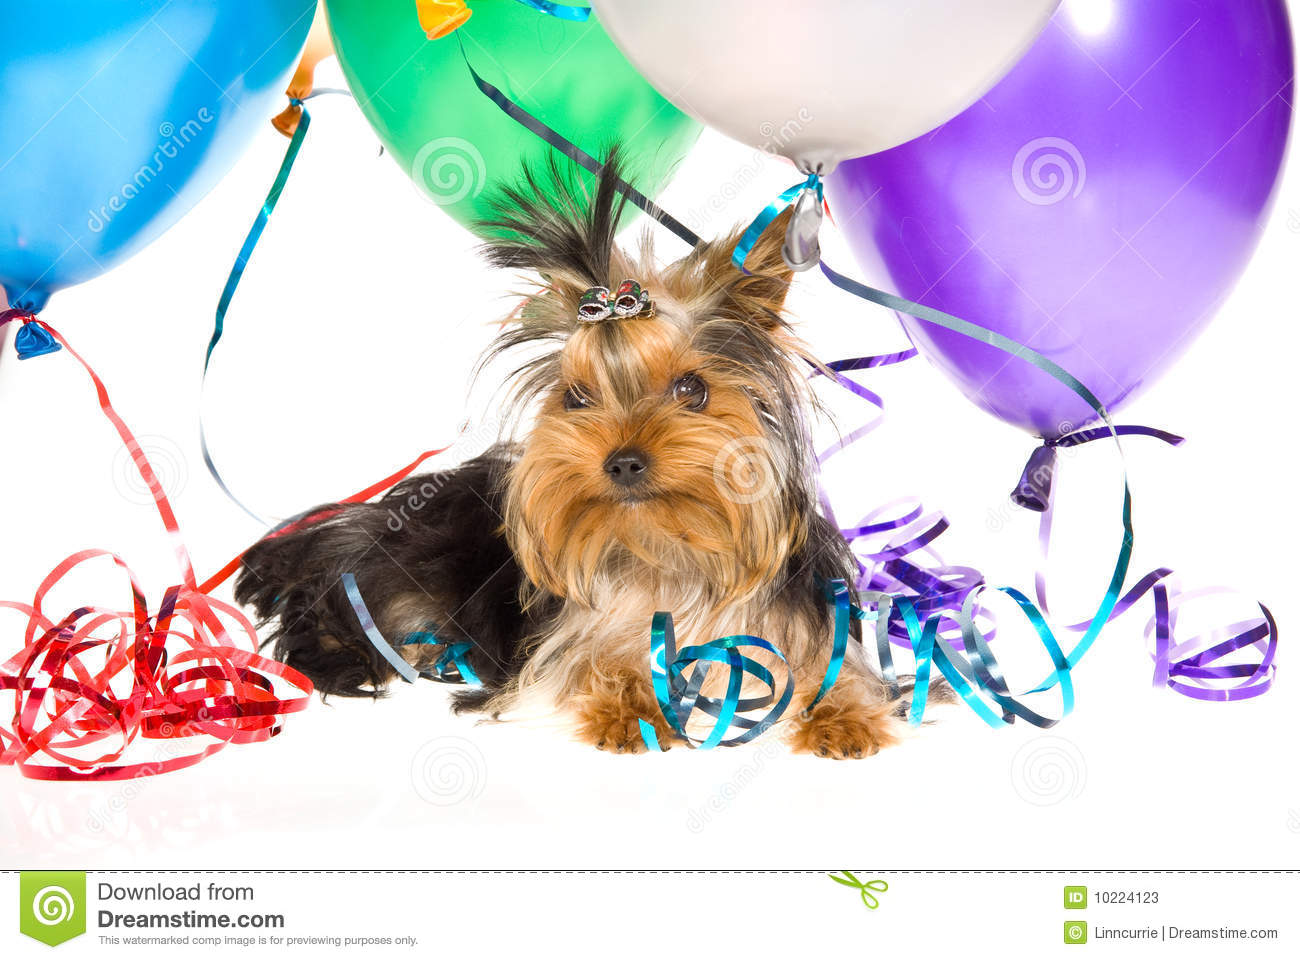 Cute Yorkie Puppy With Party Balloons Stock Photos   Image  10224123